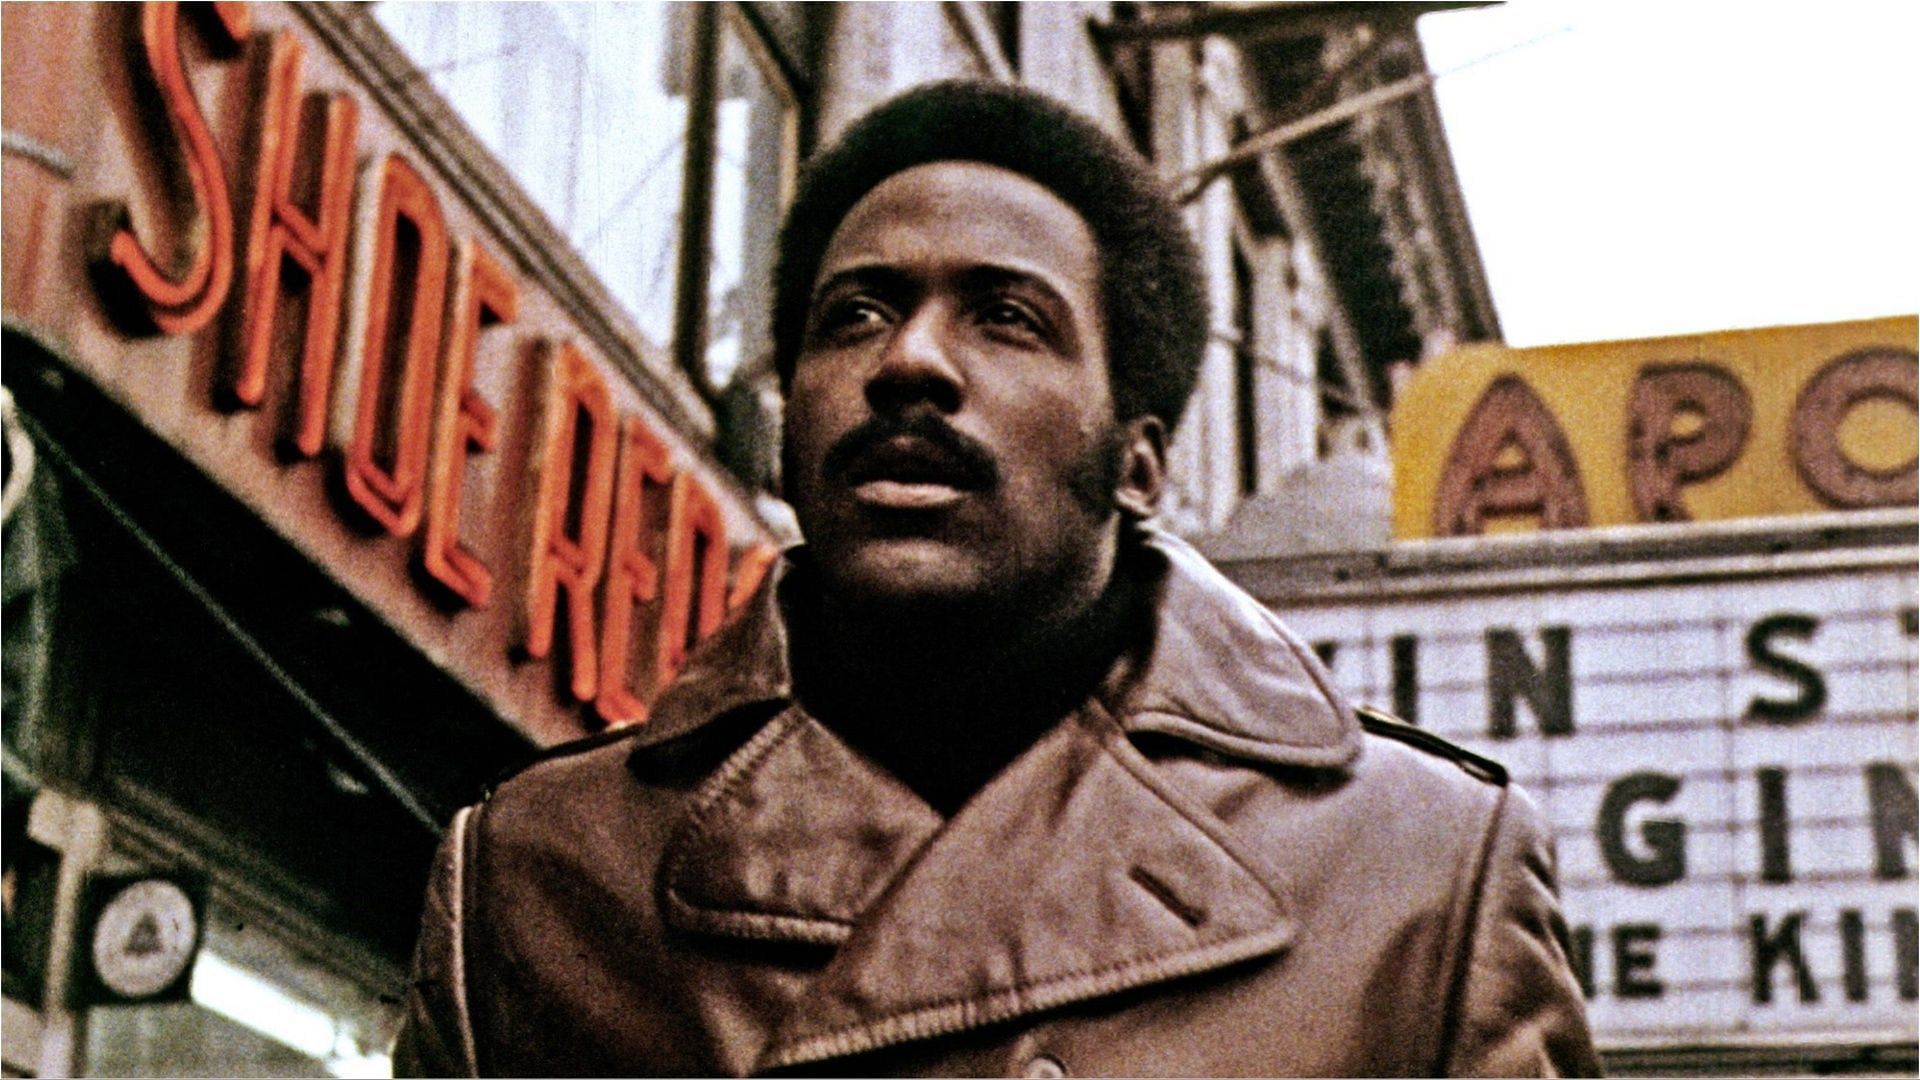 Richard Roundtree recently died at the age of 81 (Image via Super70sSports/X)